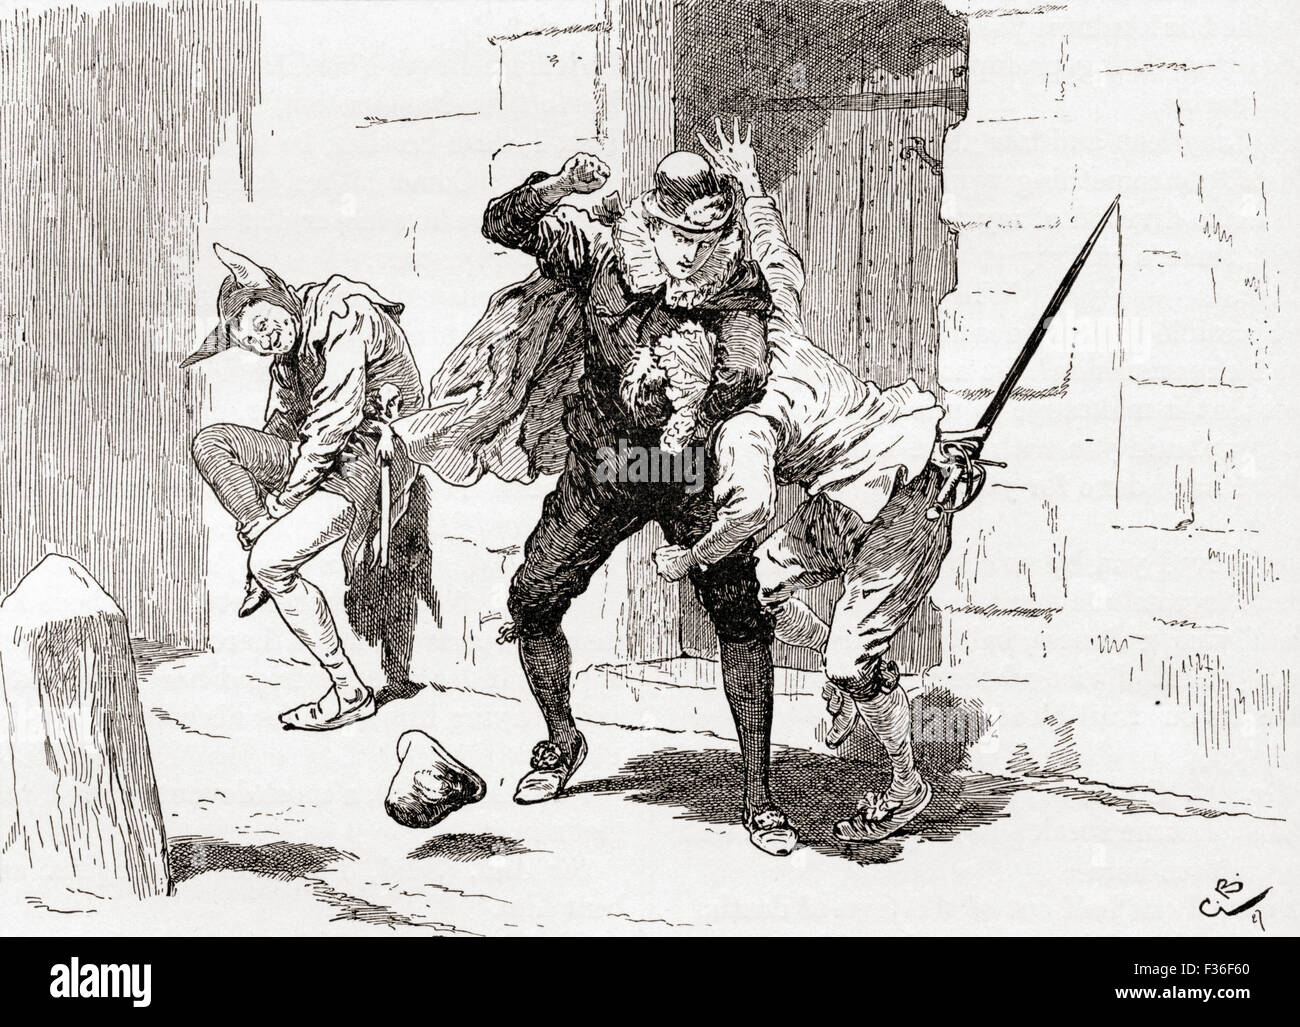 A scene from William Shakespeare's play Twelfth Night. Act IV, scene 1.  Sebastian (beating Sir Andrew):  ' Why, there's for thee, and there, and there!'  Illustration by Gordon Browne. Stock Photo